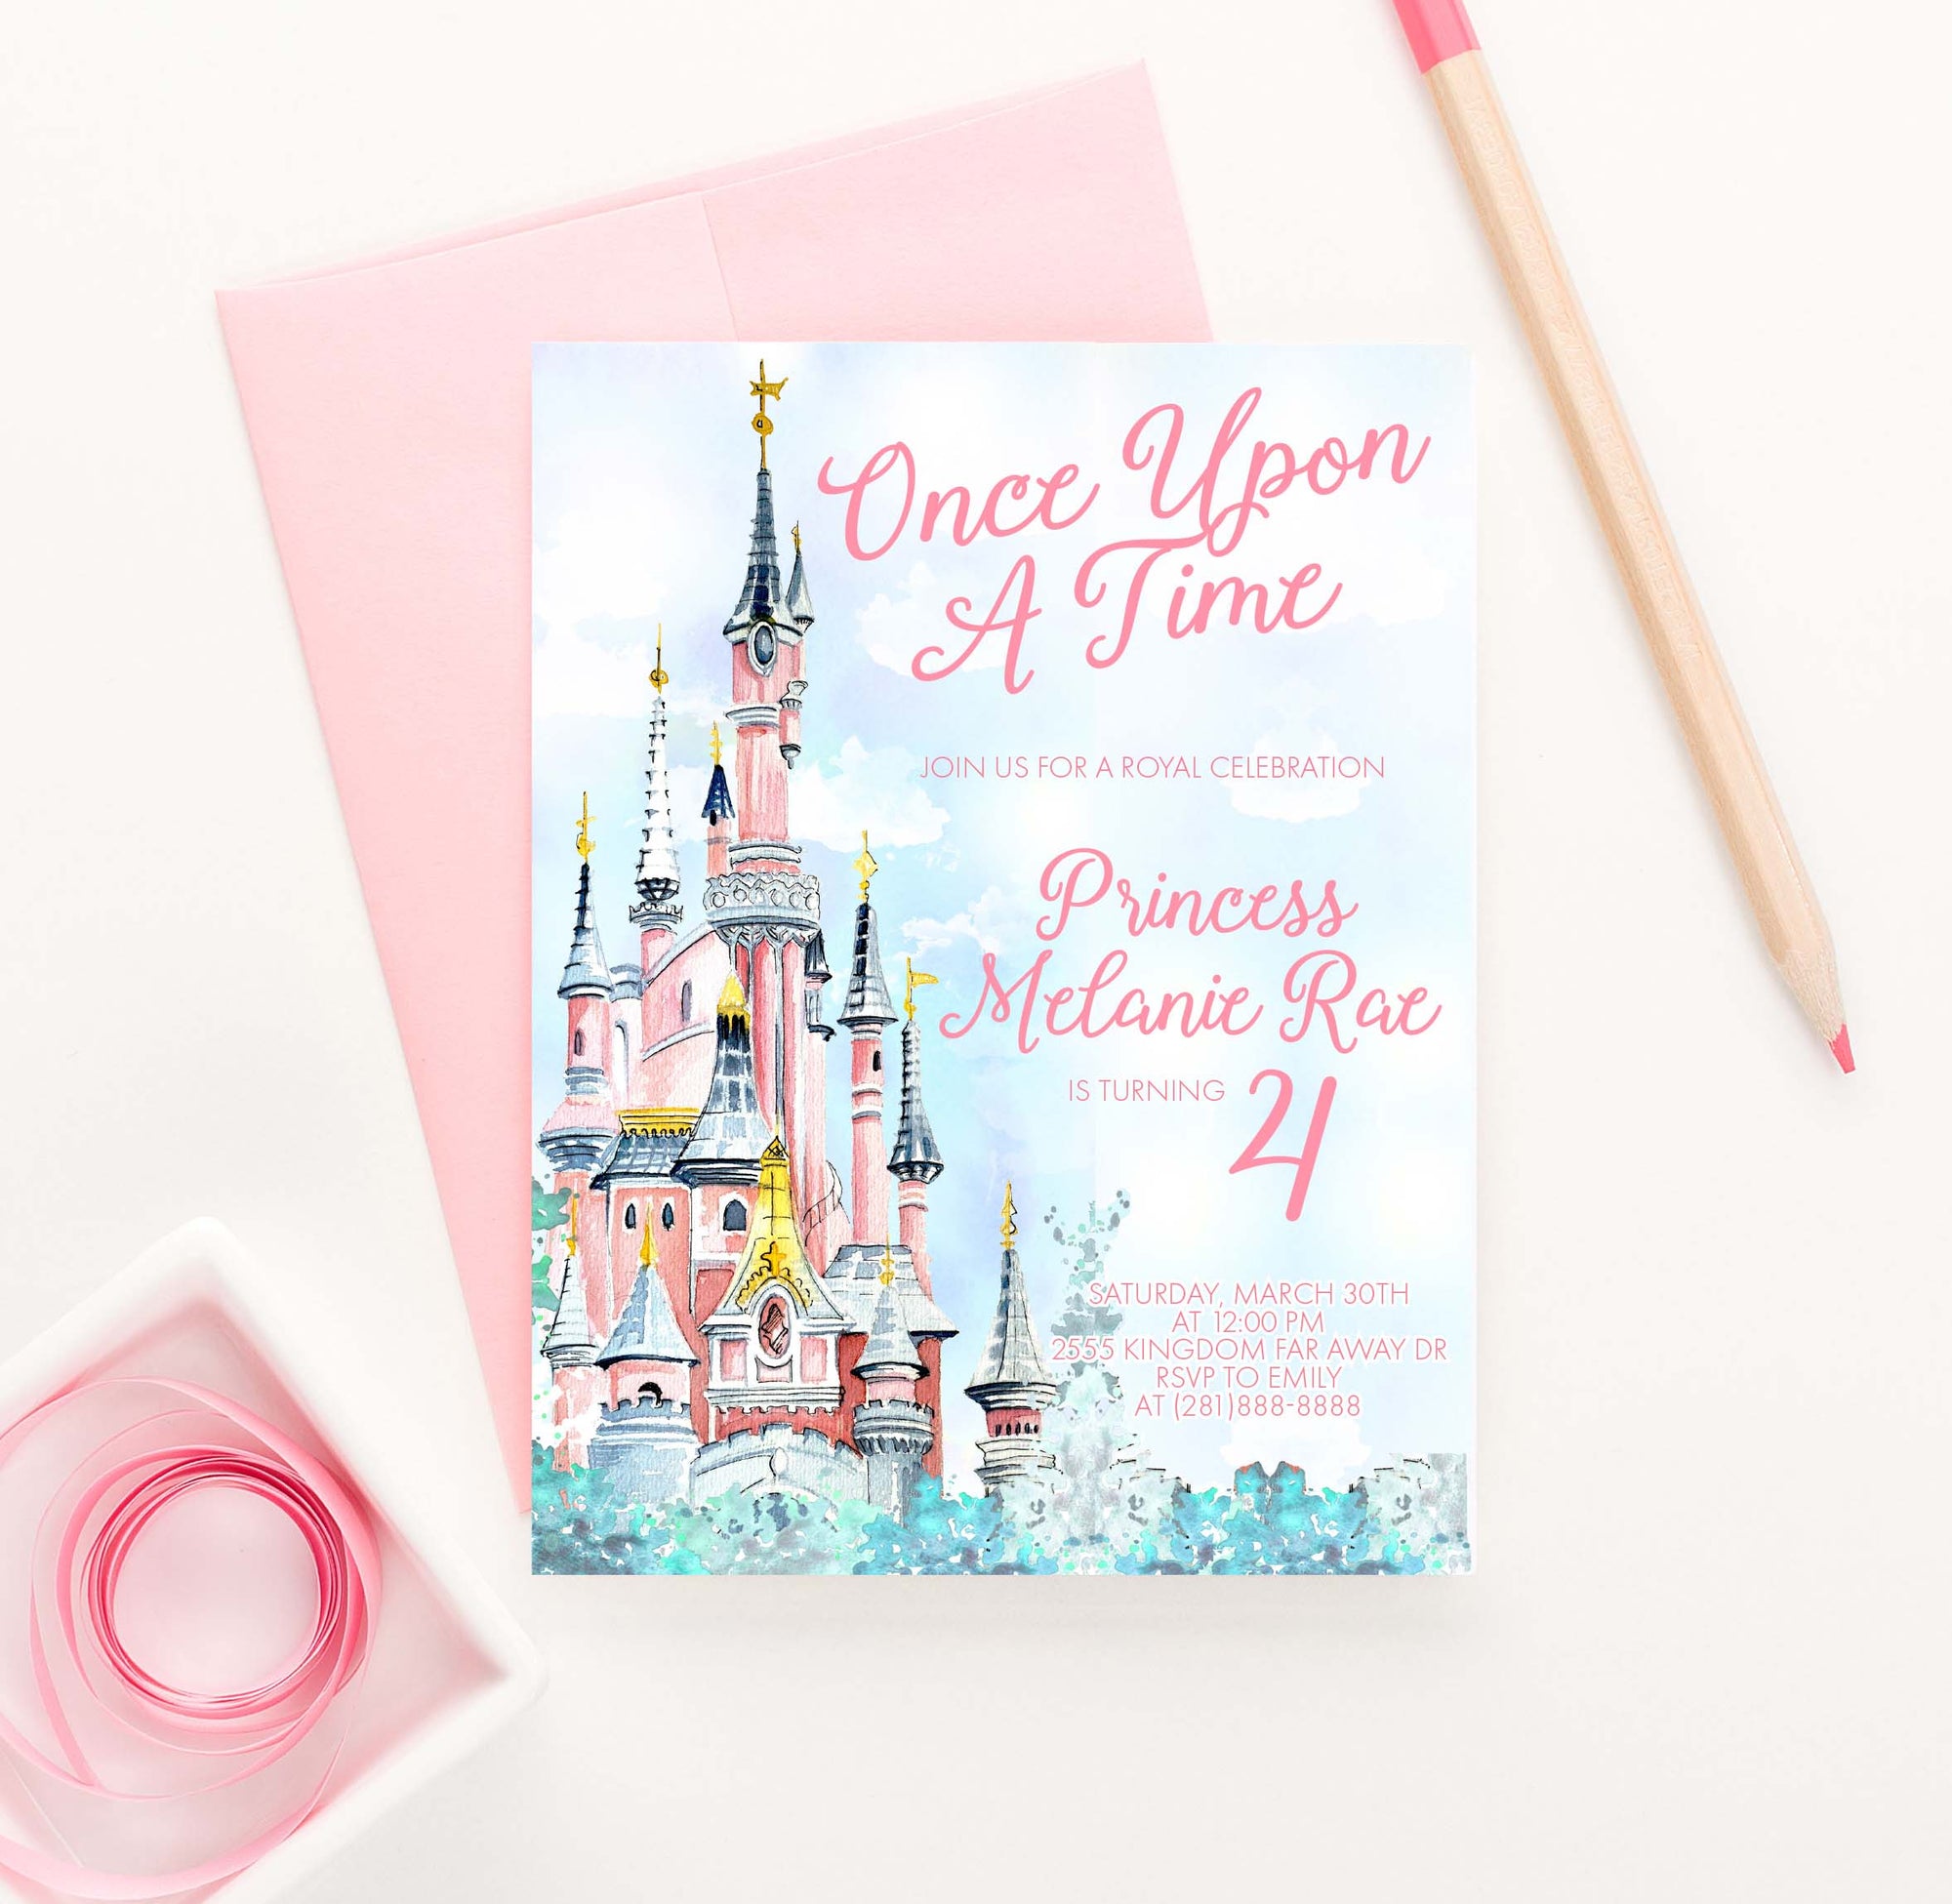 BI107 once upon a time birthday party invites with princess castle fairytale magical